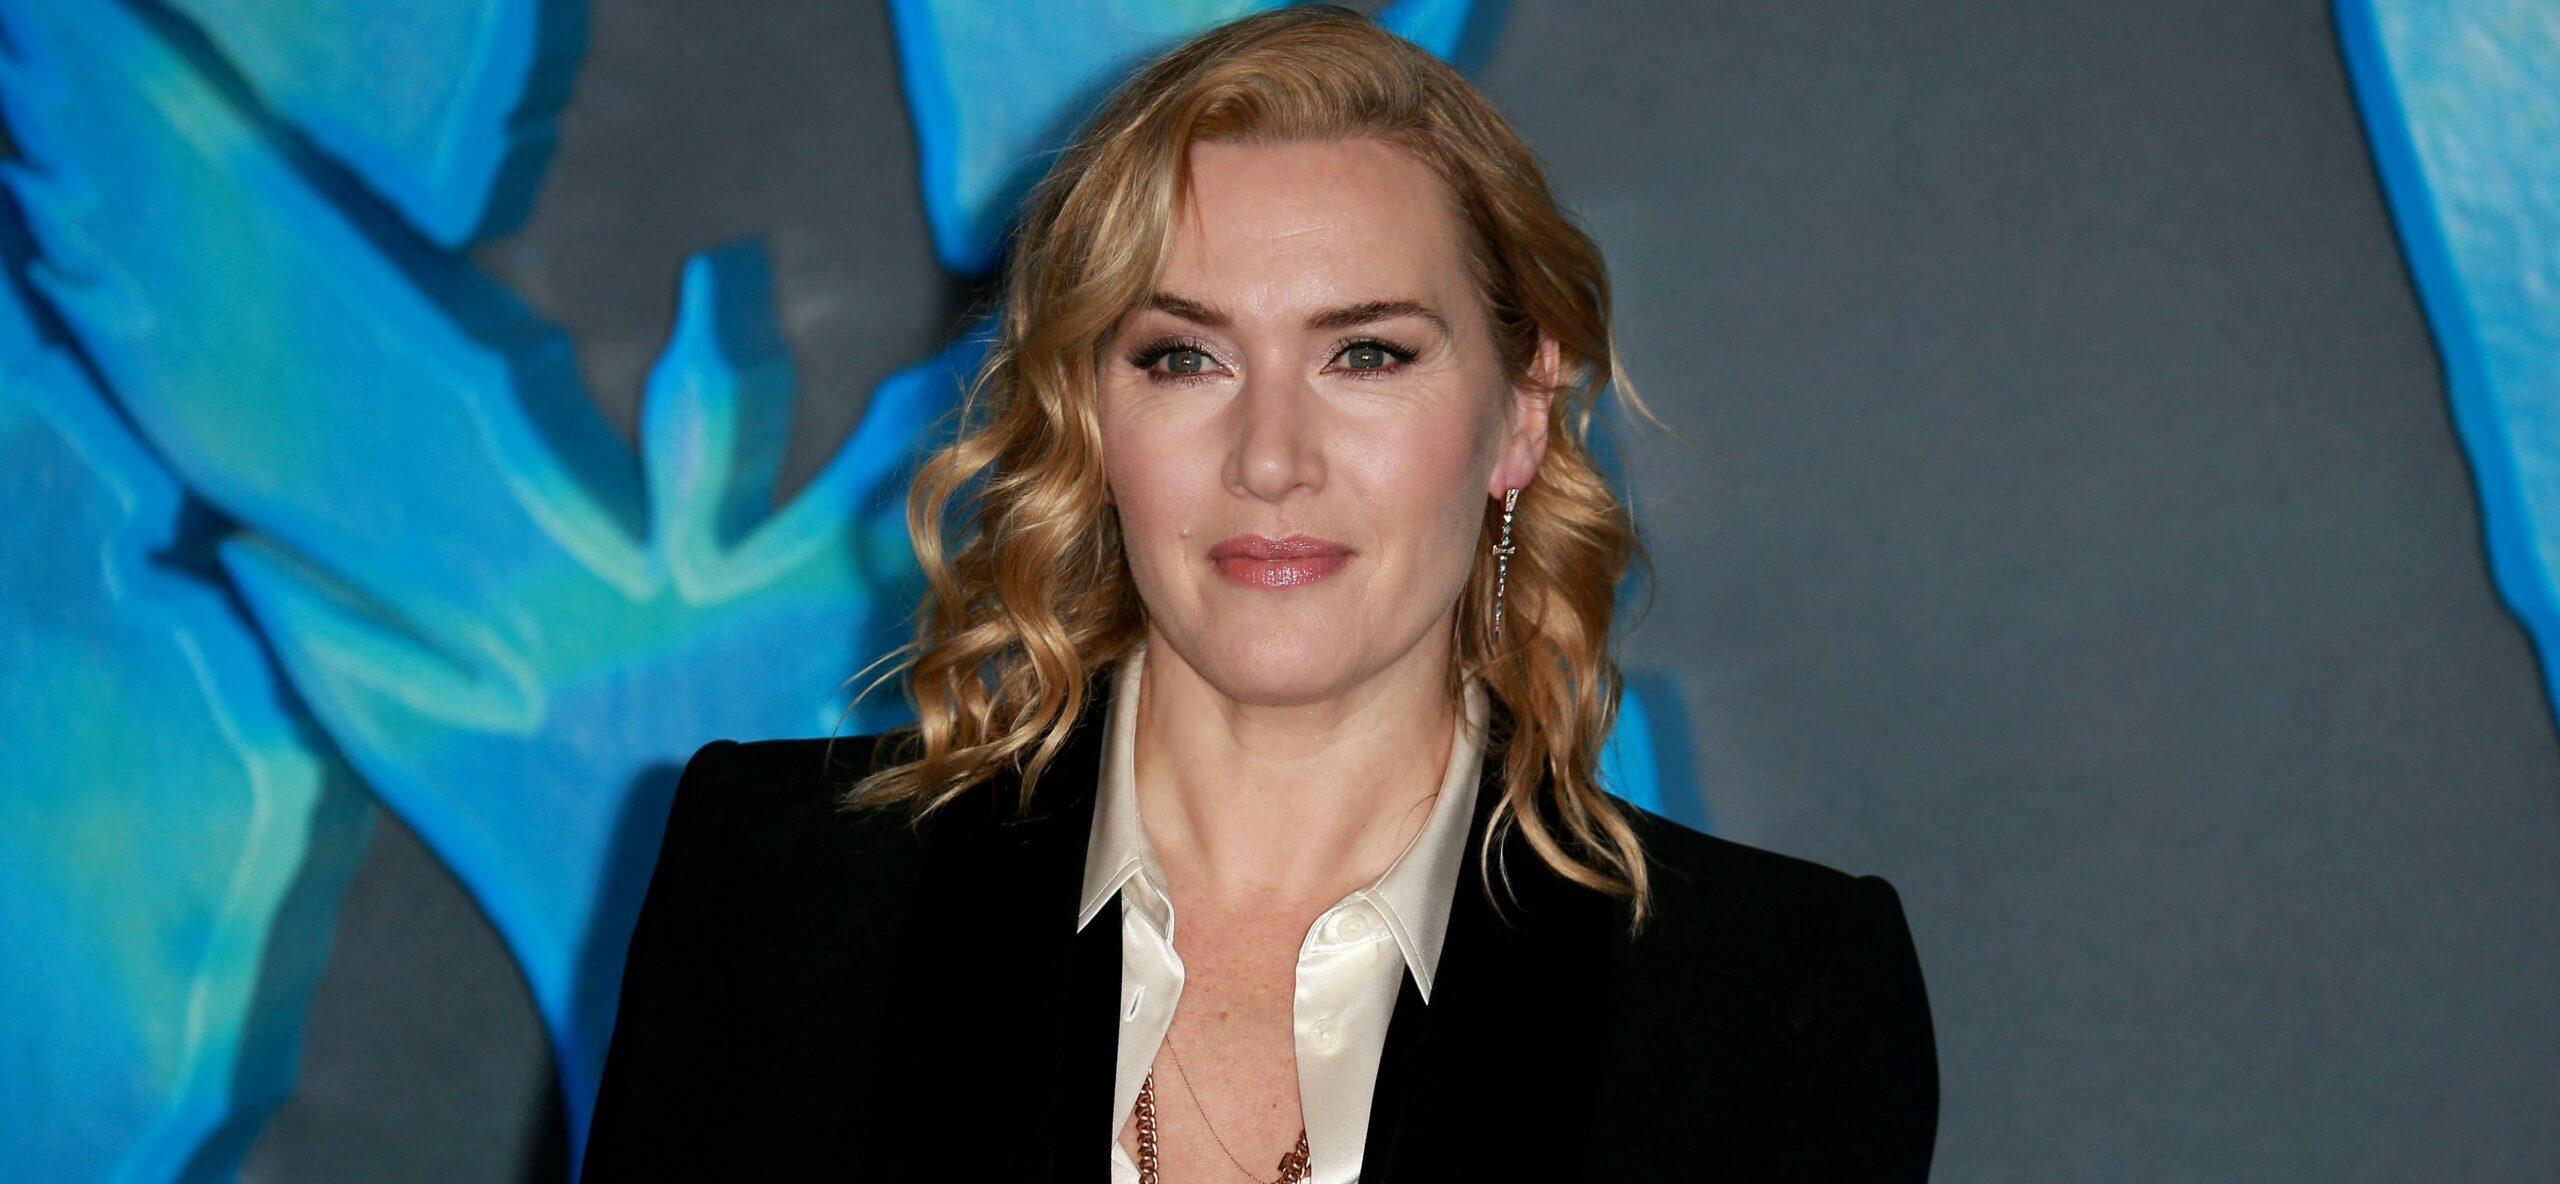 Avatar: The Way of Water star Kate Winslet